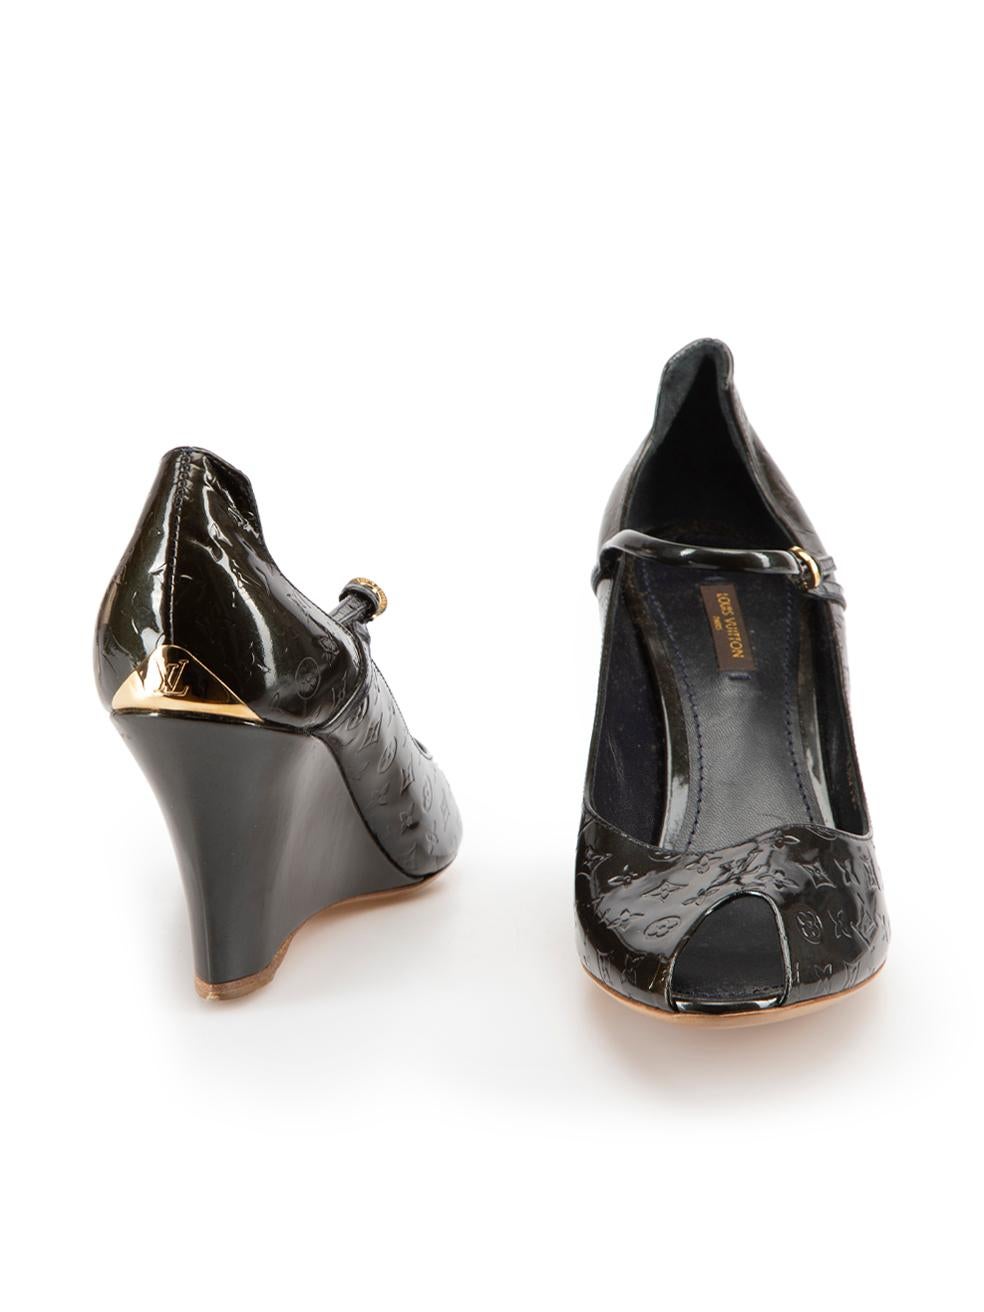 Black Patent Leather Petite Monogram Peep-Toe Wedge Sandals Size IT 40 In Good Condition For Sale In London, GB